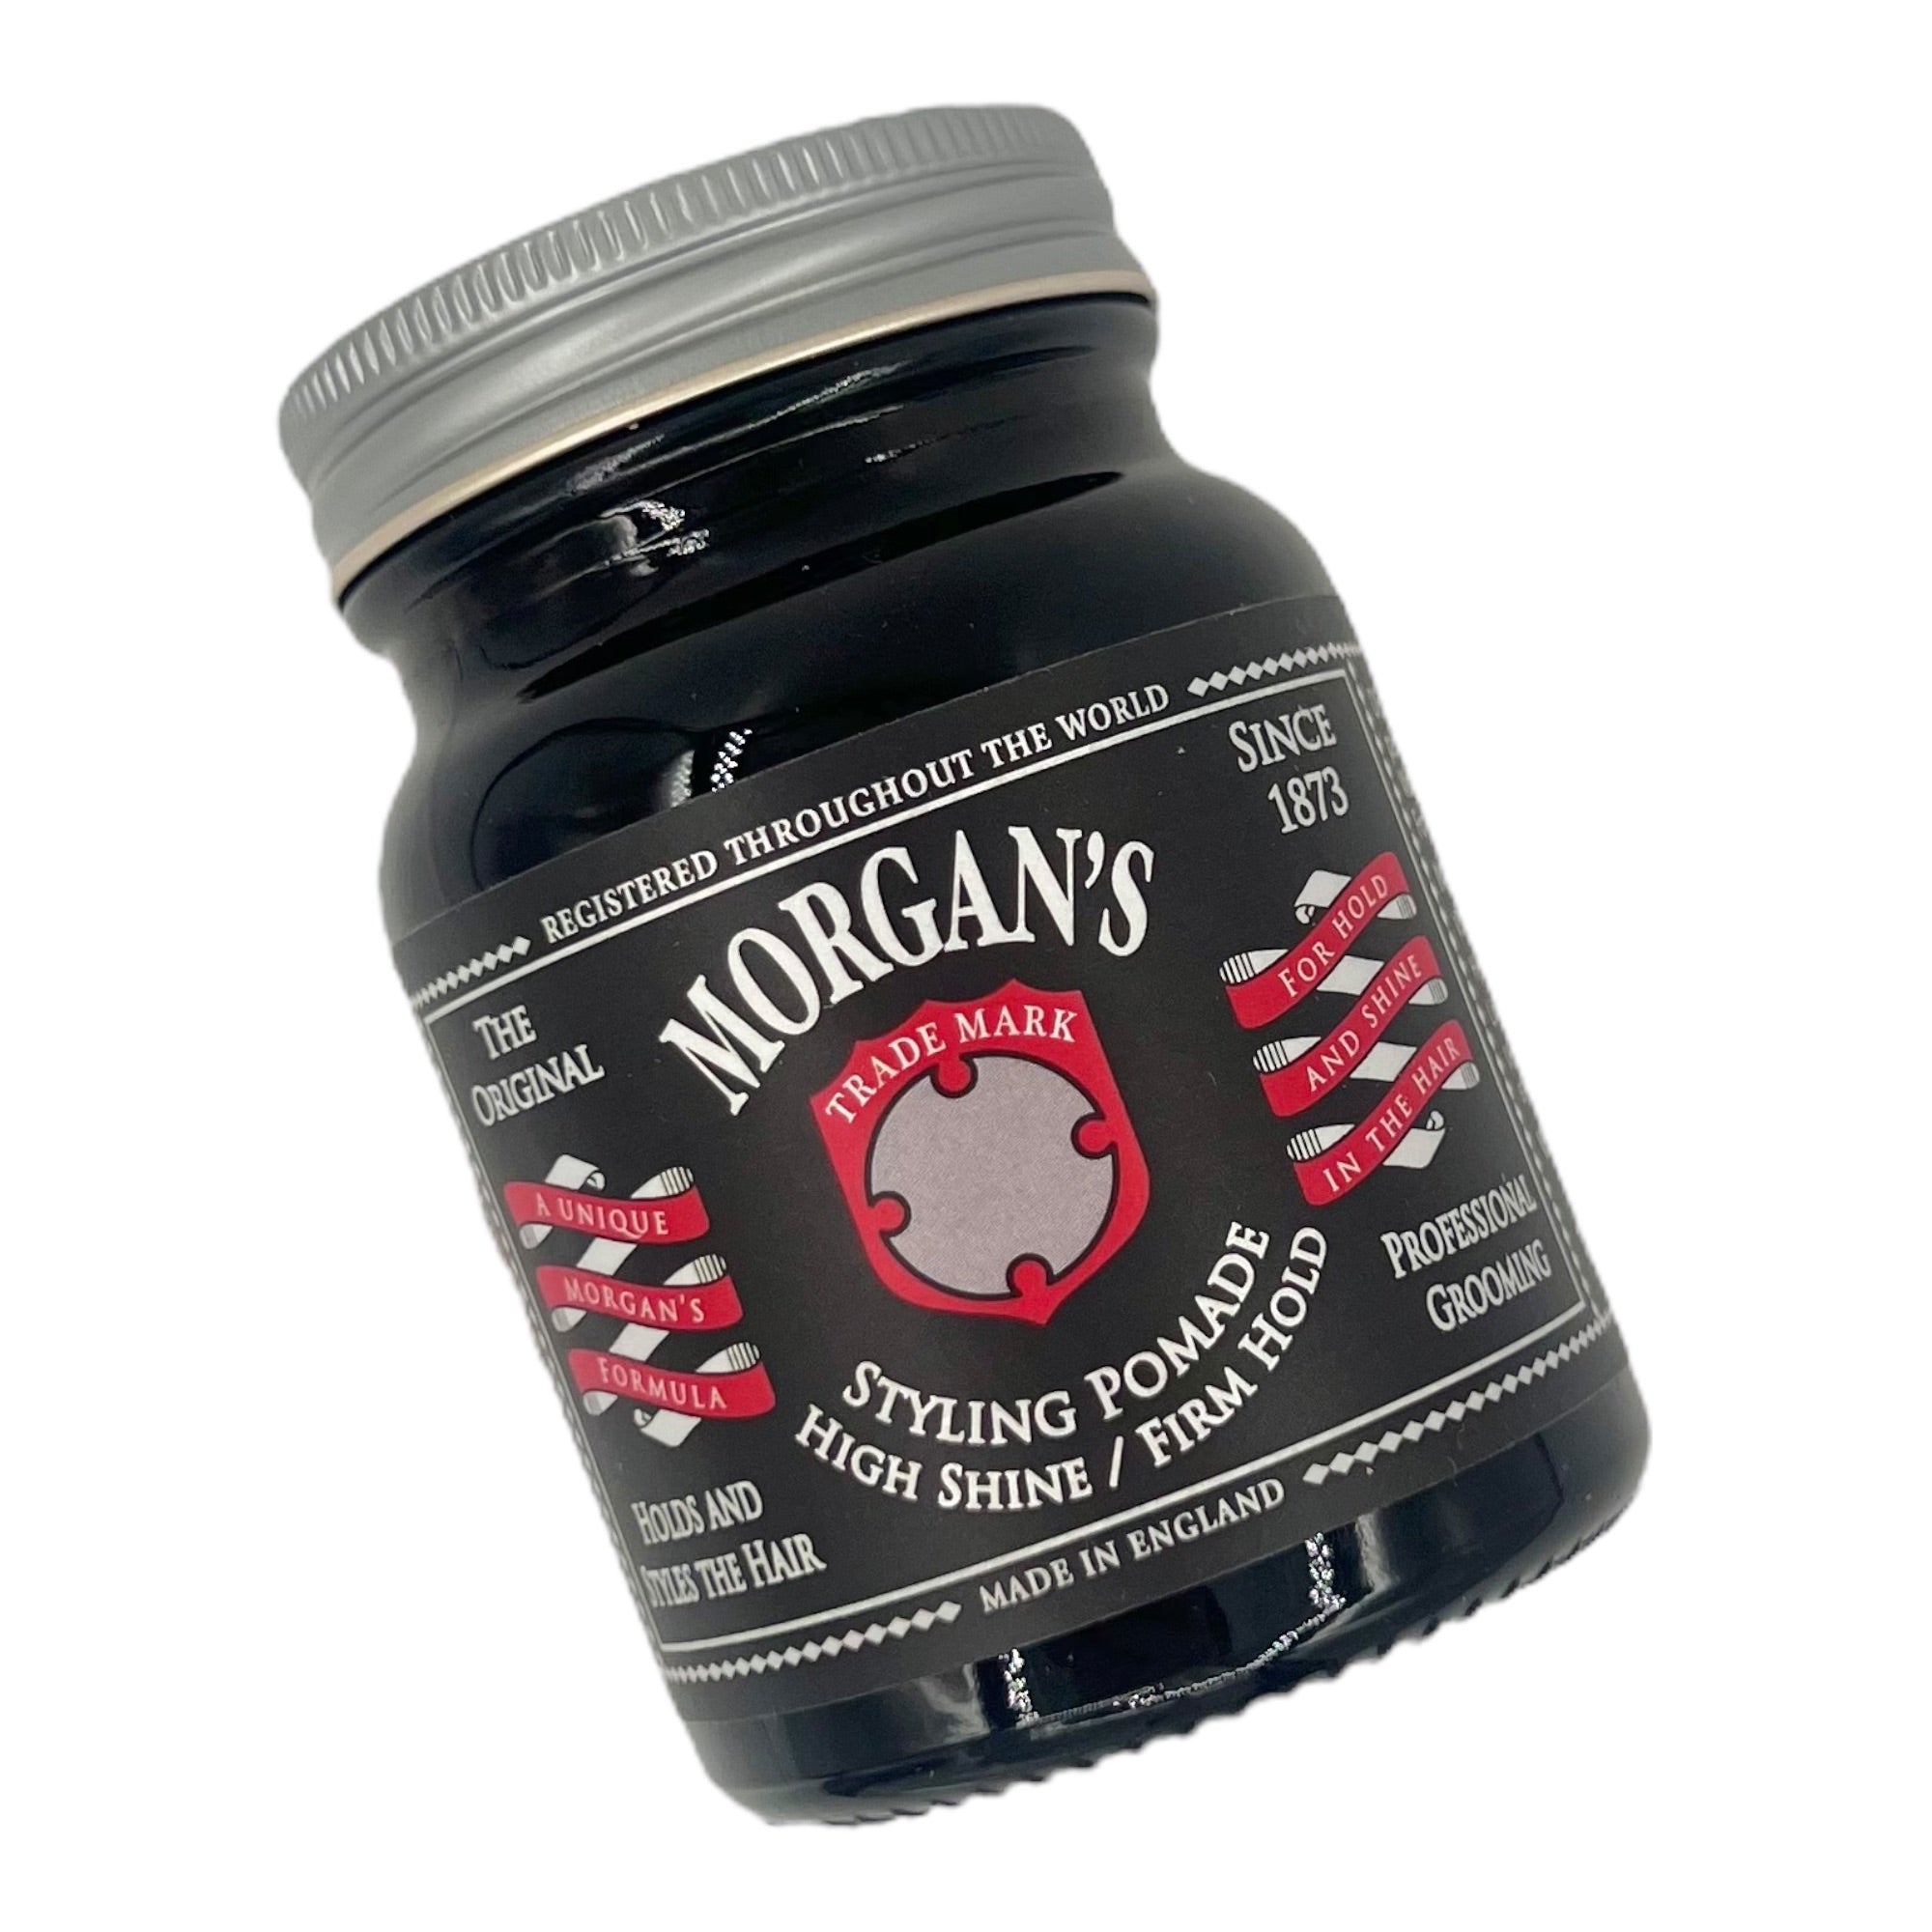 Morgan's - Styling Pomade High Shine Firm Hold 100g